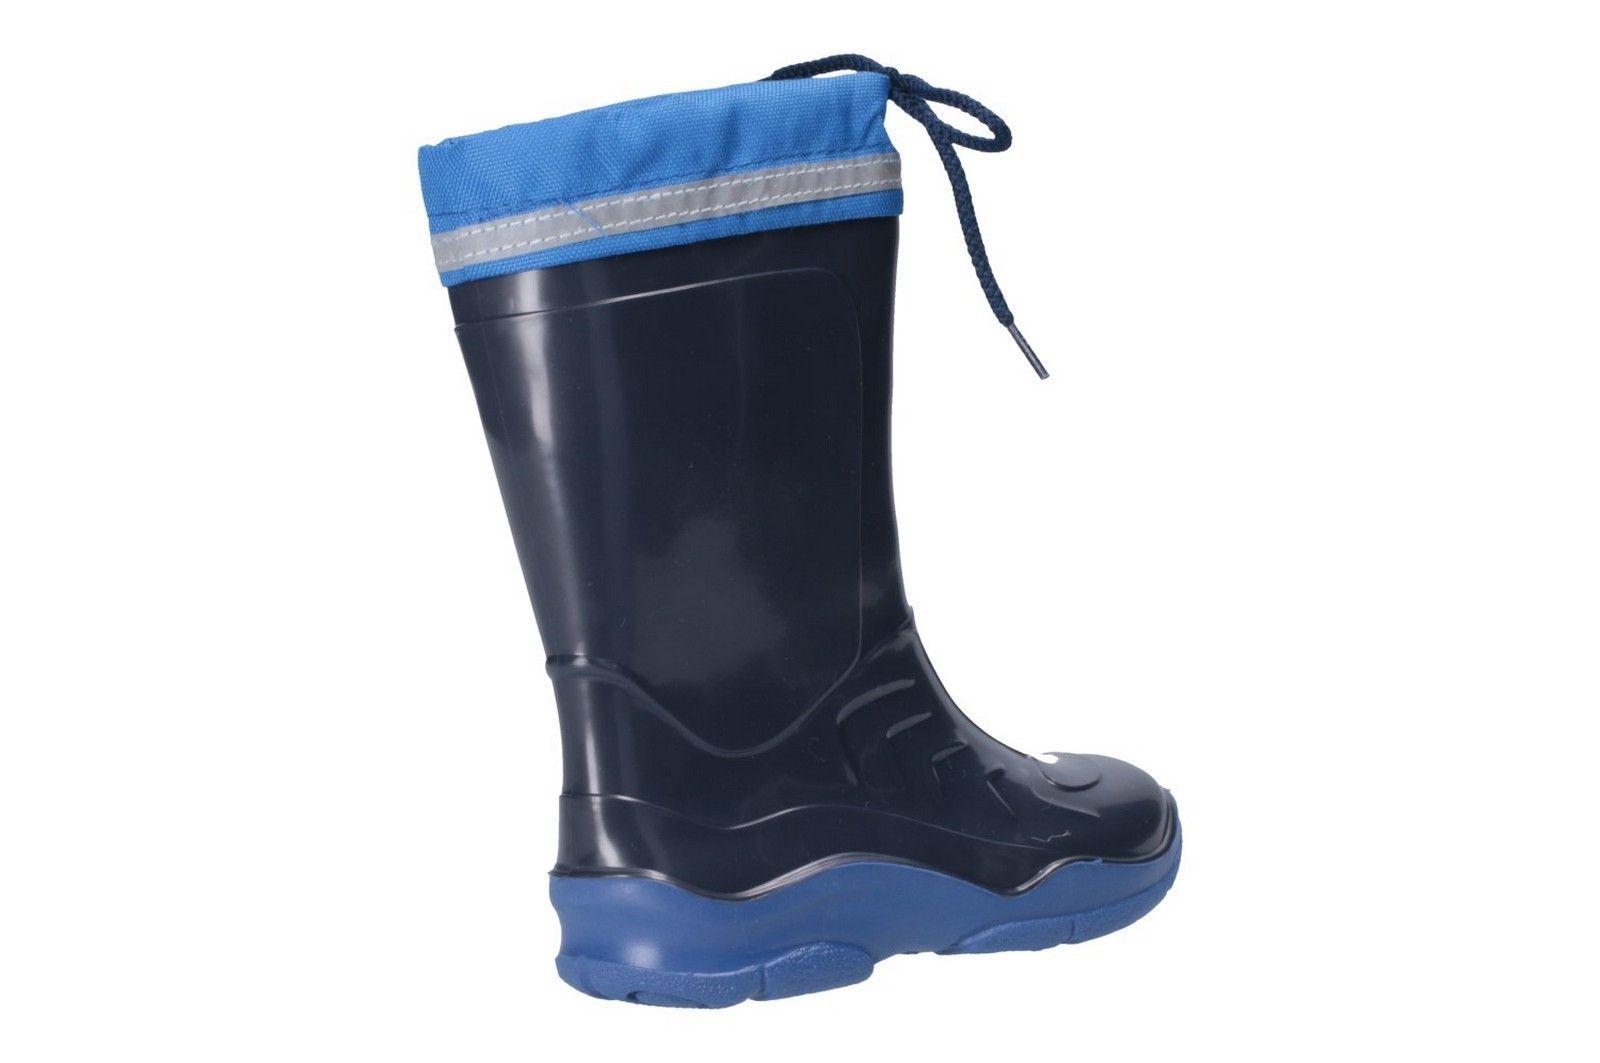 The Splash, ideal for all outdoor activities in all winds and weathers. With a waterproof PVC upper and sole your feet can stay dry all day, whilst a polyester lining will keep them warm. Laces at calf height allow for an adjustable fit.Waterproof PVC upper allow feet to stay dry. 
Soft polyester lining mean you feet can stay warm in cold weather. 
Sturdy PVC sole for a durable wear. 
Extra grip with a ladder grip outsole. 
Reflective band on cuff means you can be seen in poor visability.